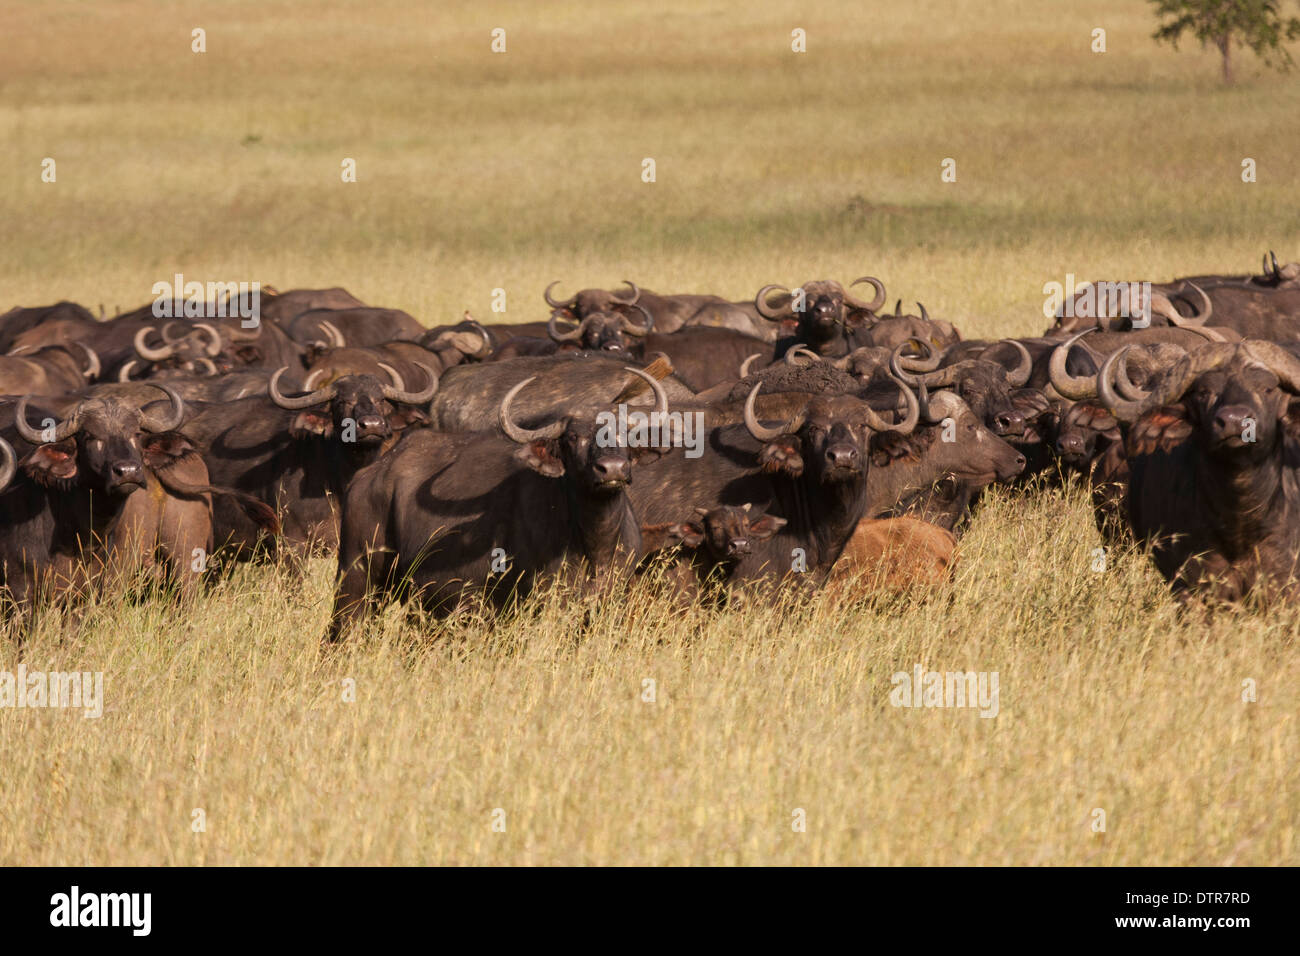 A herd of African Buffalo or Cape Buffalo (Syncerus caffer) Stock Photo